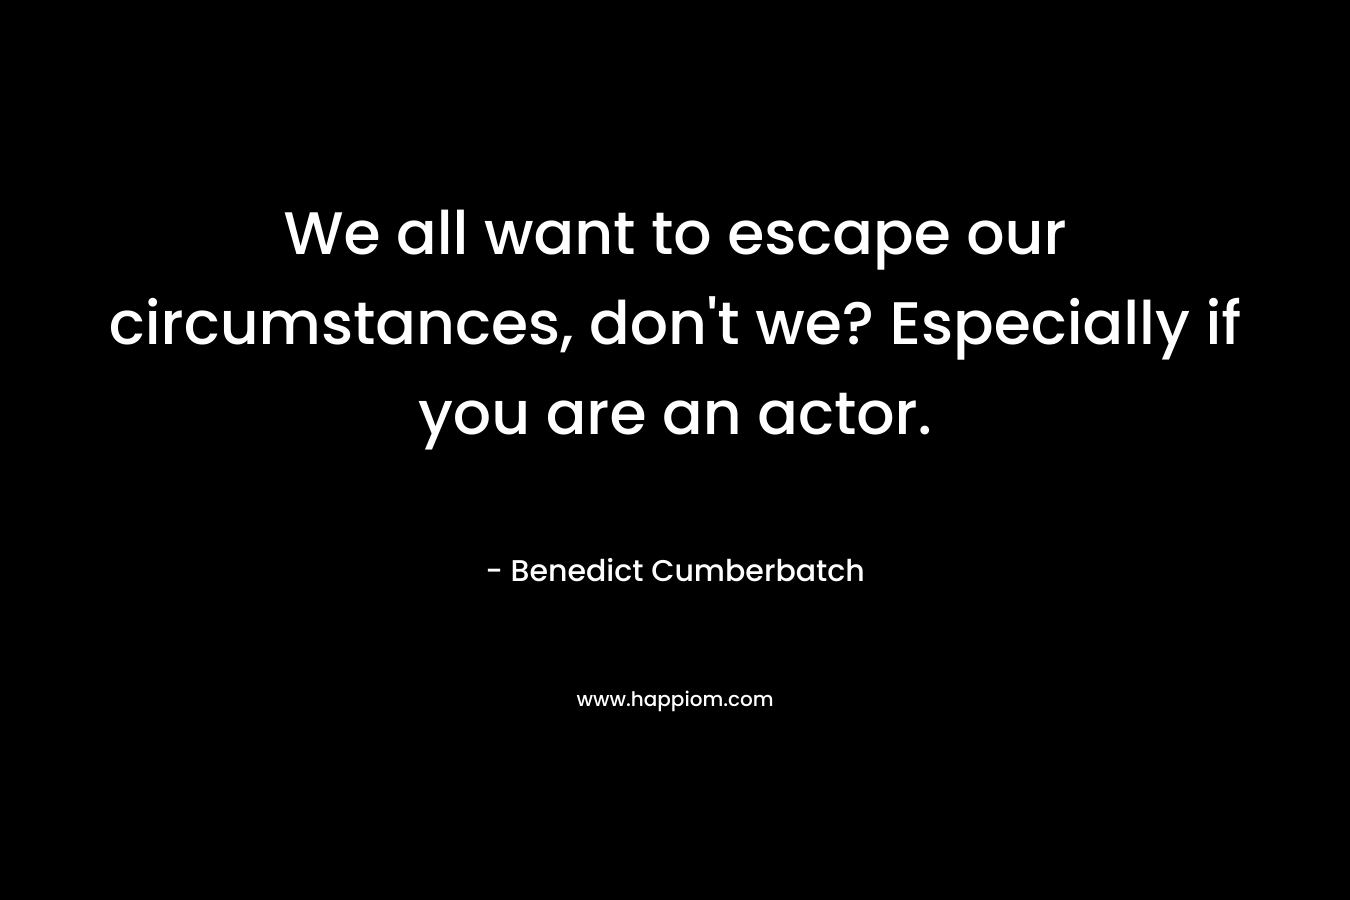 We all want to escape our circumstances, don't we? Especially if you are an actor.